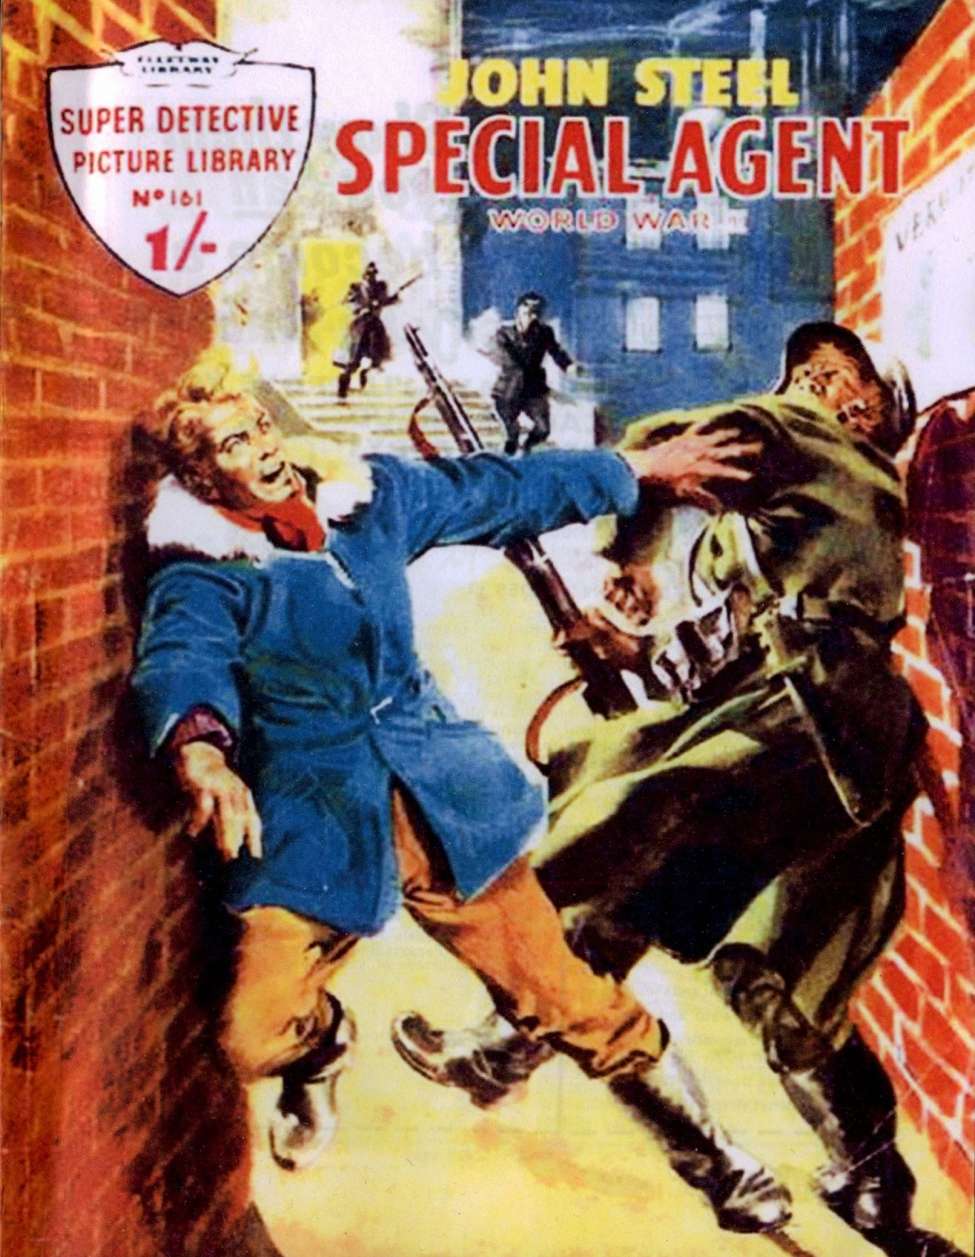 Book Cover For Super Detective Library 161 - John Steel Special Agent